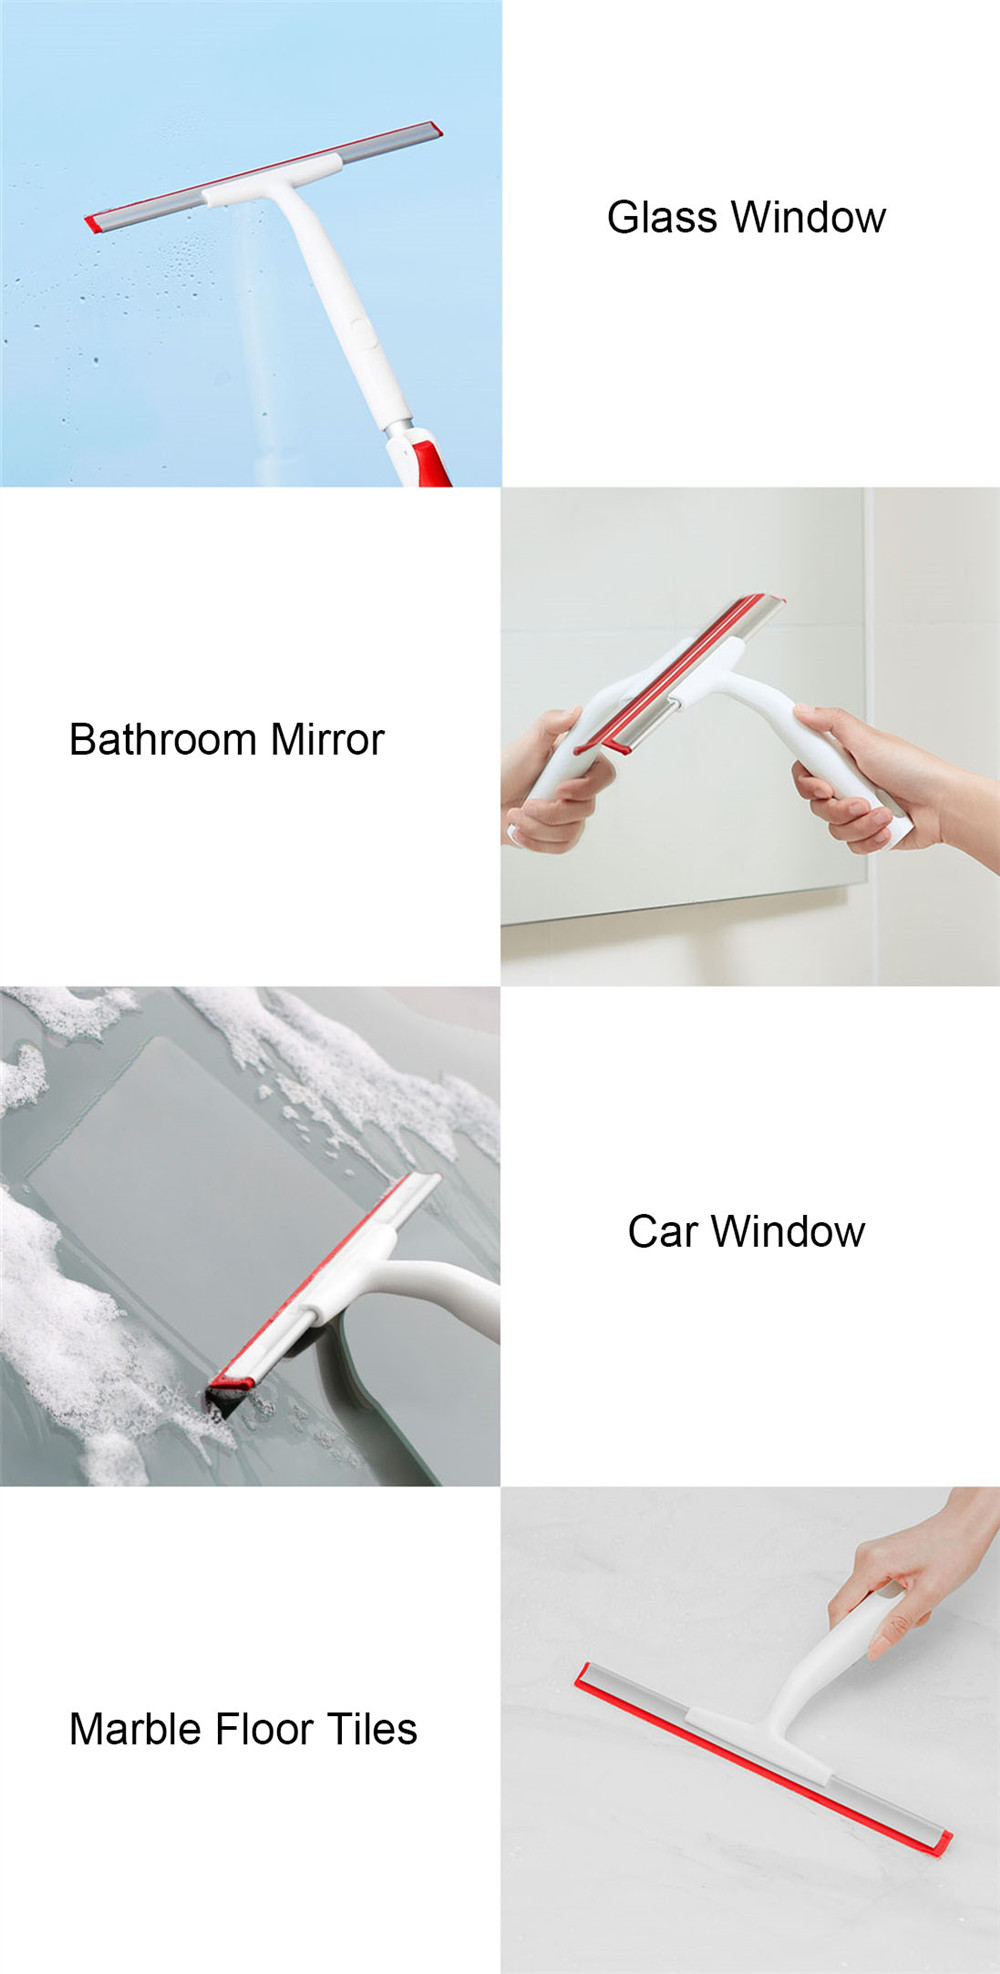 YIJIE-Retractable-Window-Squeegee-Portable-Car-Glass-Cleaner-300mm-Scrapers-Bathroom-Cleaning-Kit-fr-1463820